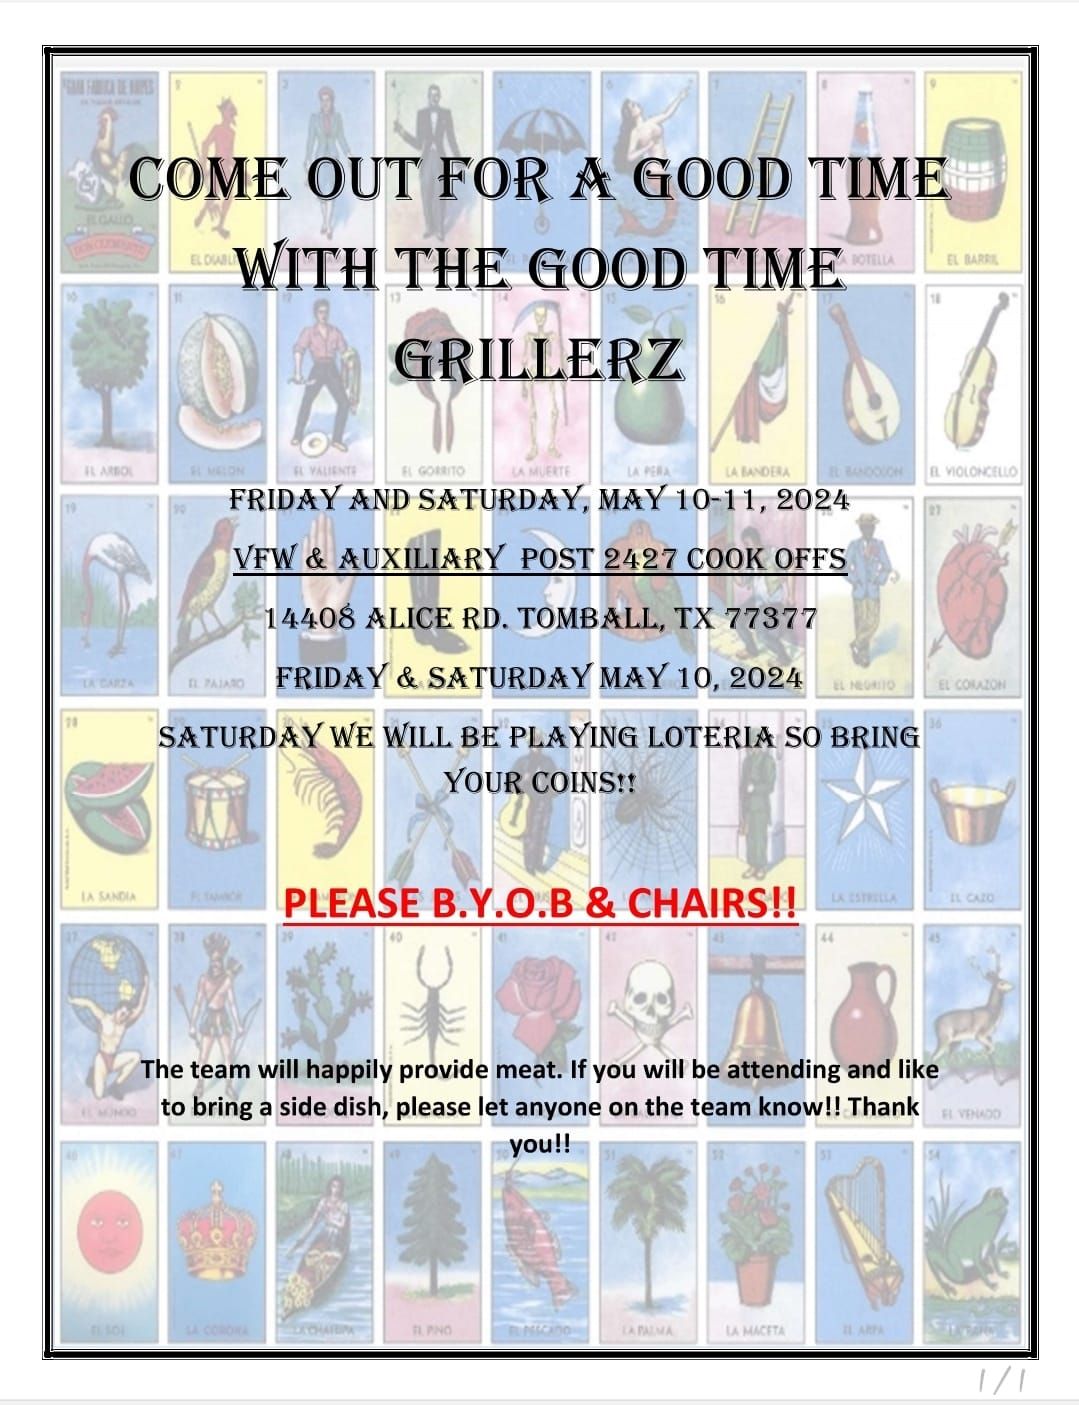 VFW & AUXILIARY POST 2427 COOK OFFS